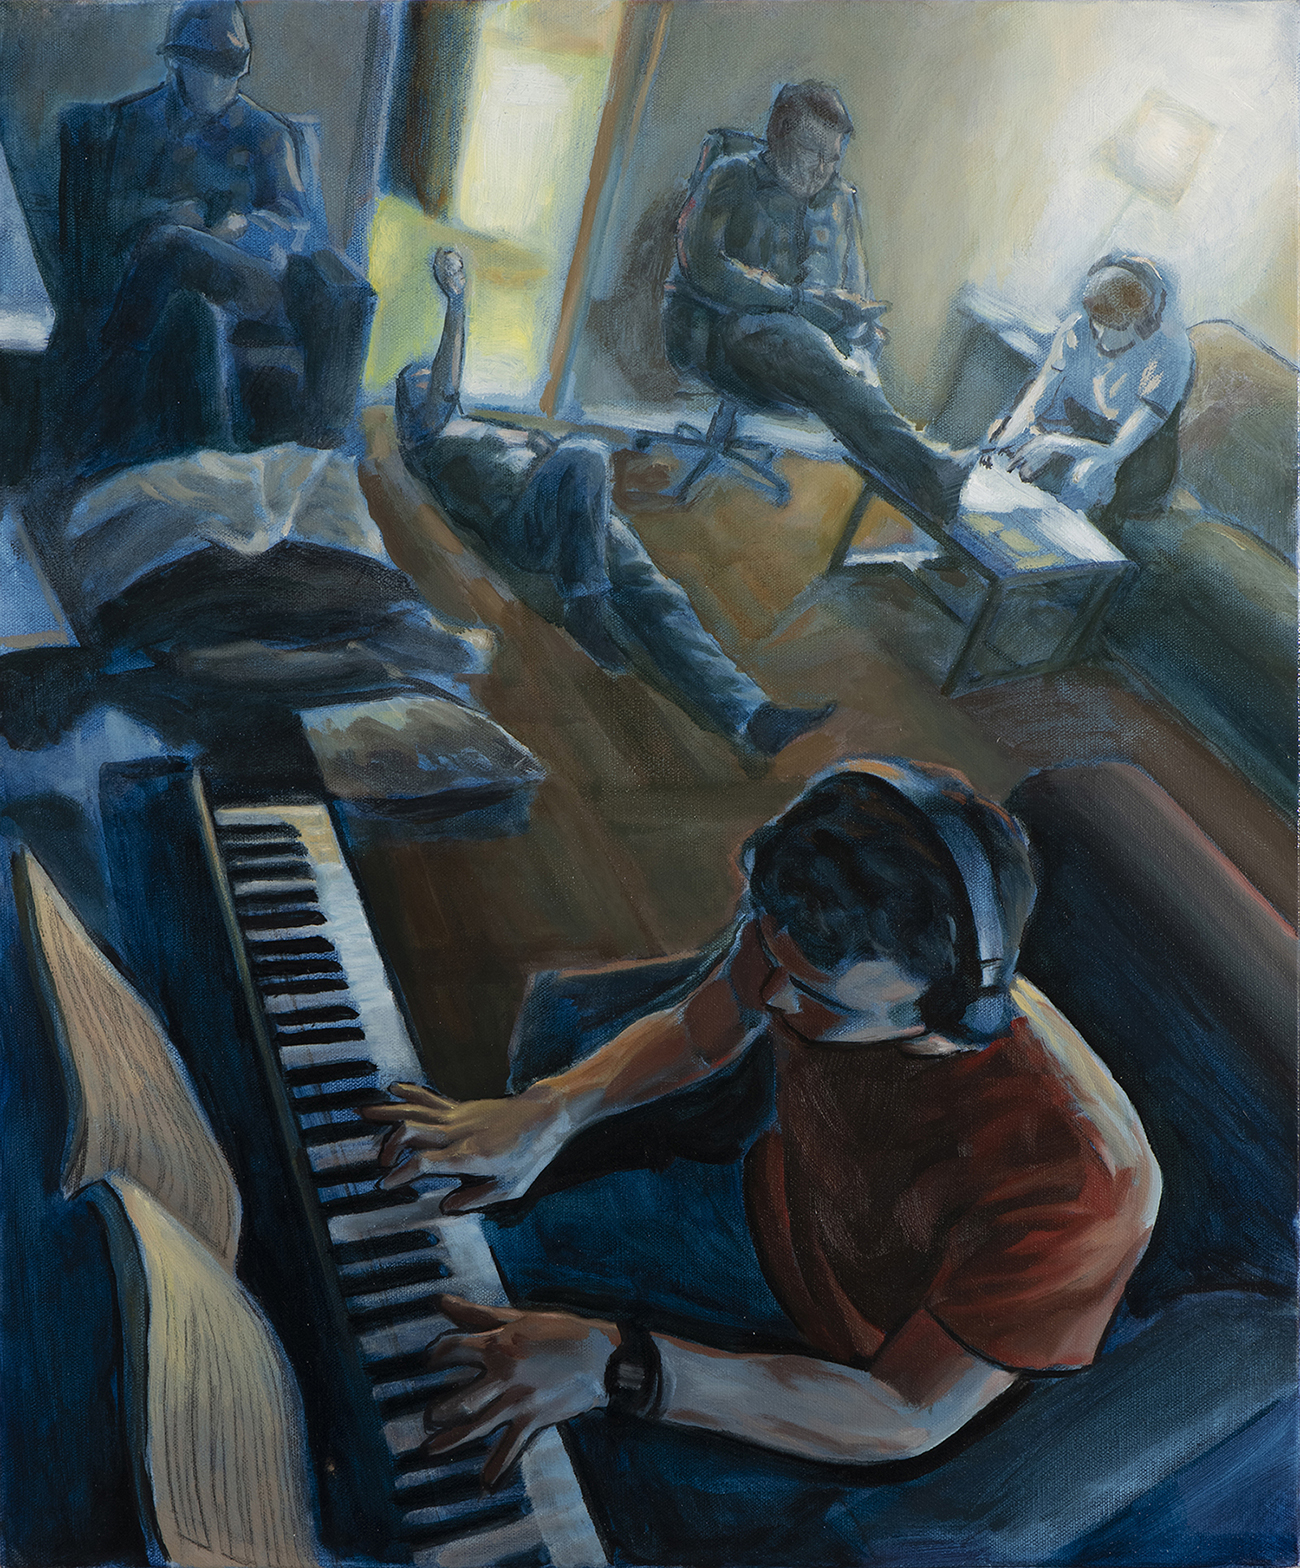 A painting of a group of people hanging out in a room, doing separate activities like playing piano.